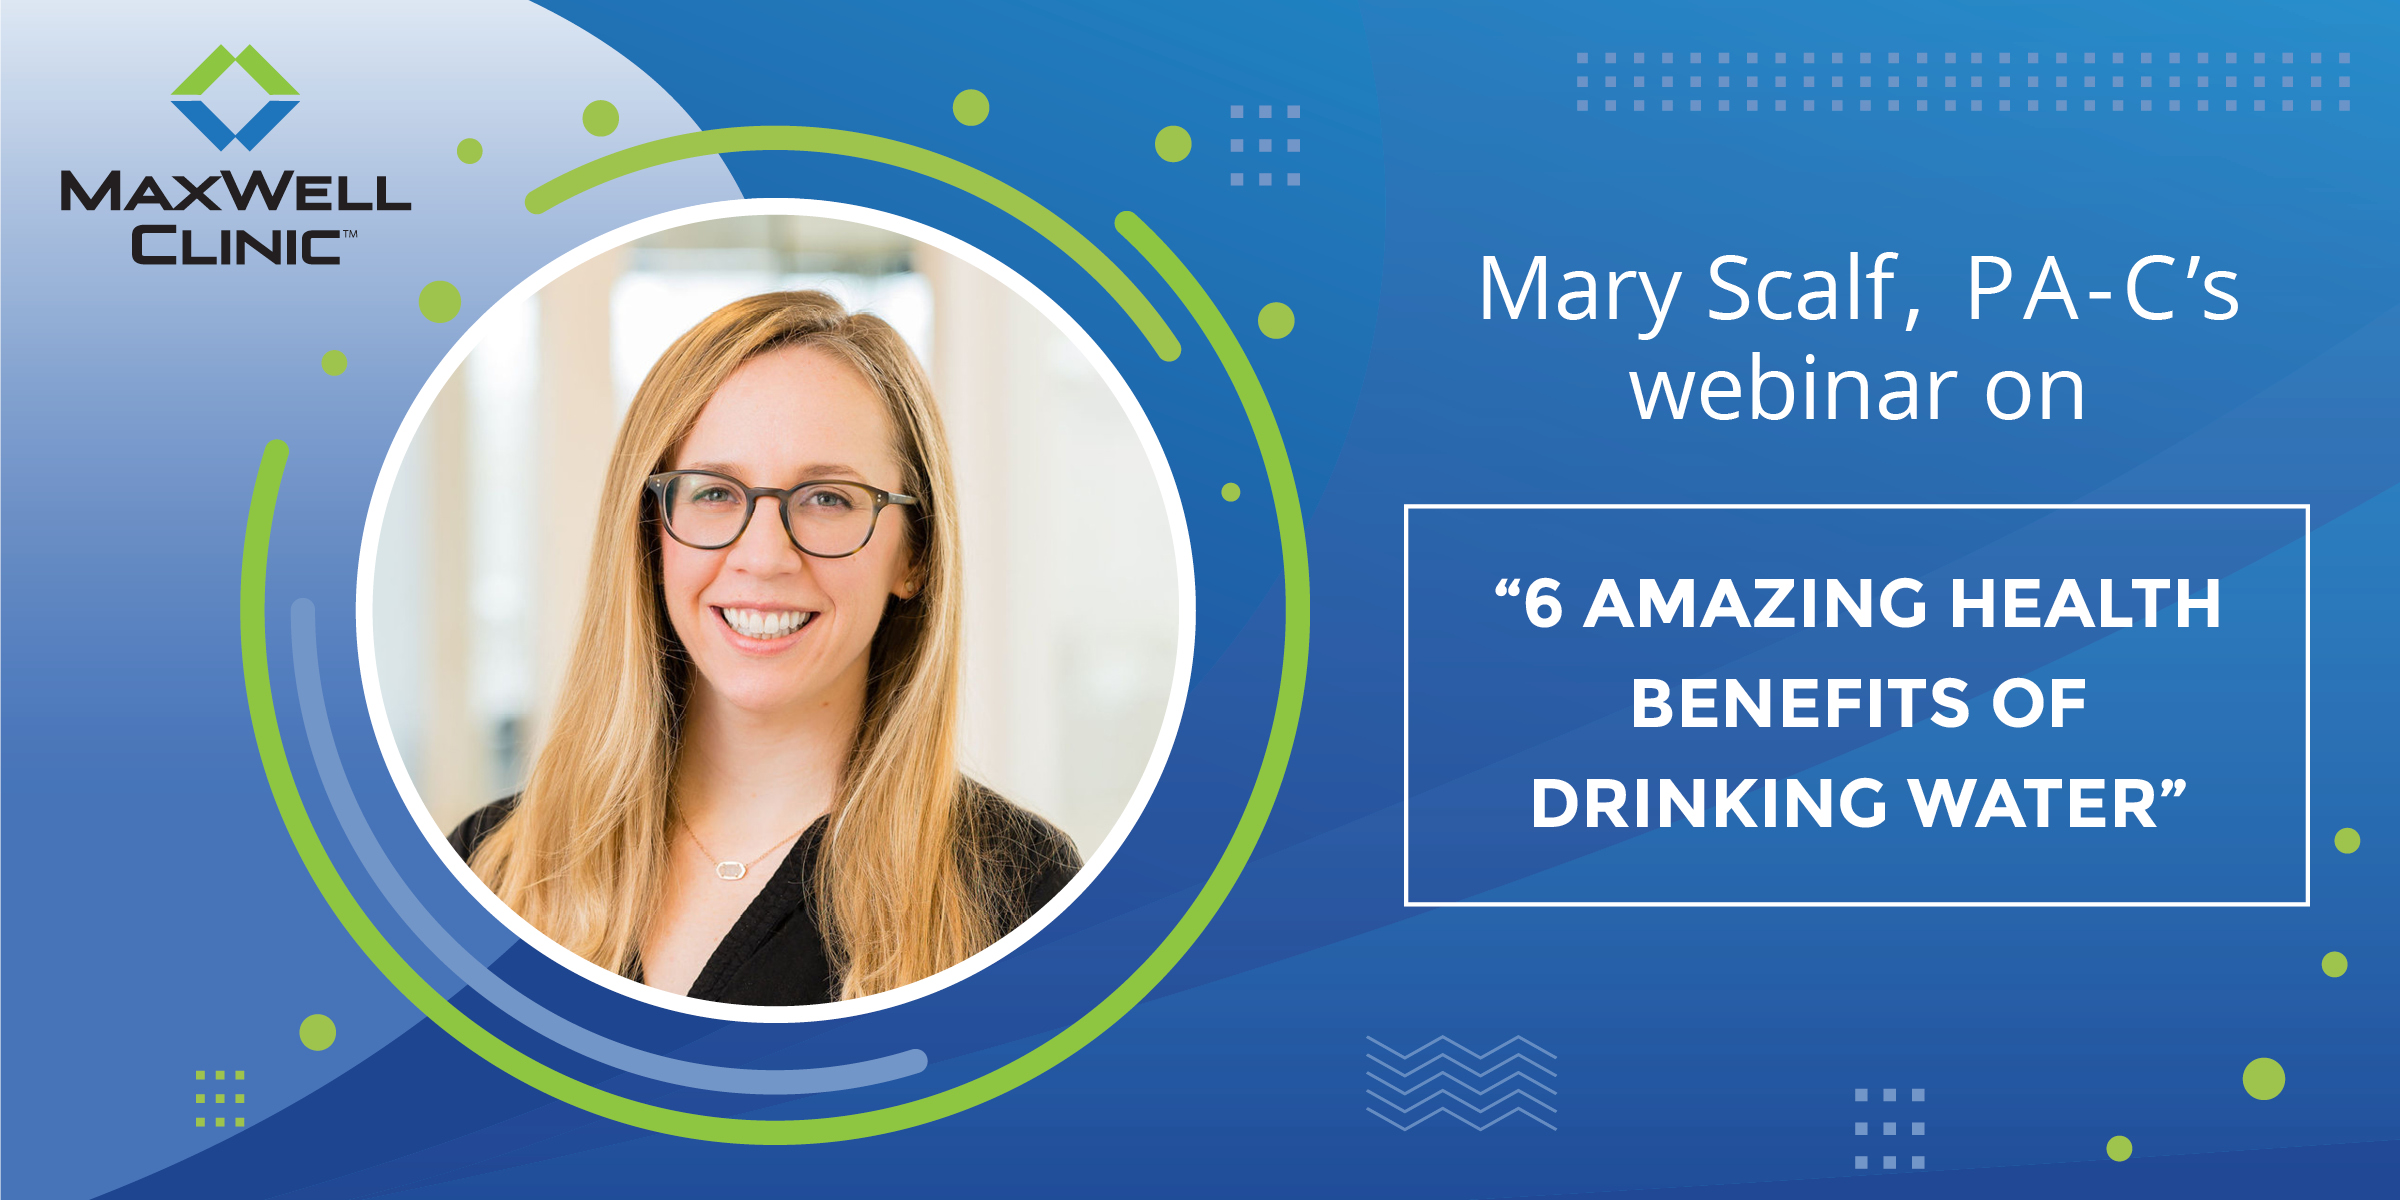 6 Amazing Health Benefits of Drinking Water with Mary Scalf, PA-C